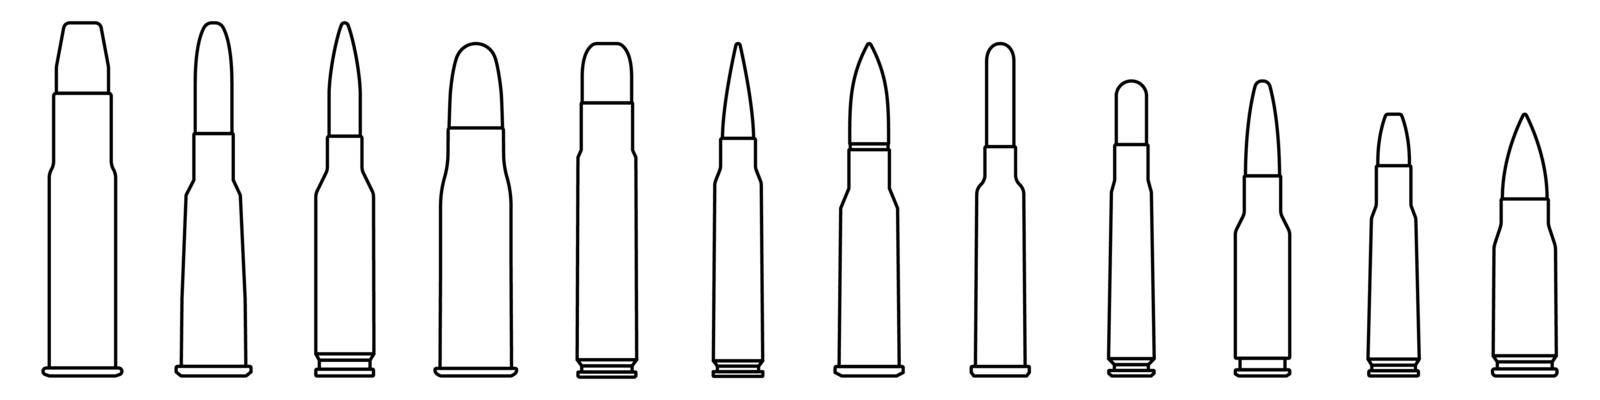 Bullet icons set. Cartridge icon in linear design. Military ammunition. Bullet or patron silhouette. Vector illustration.